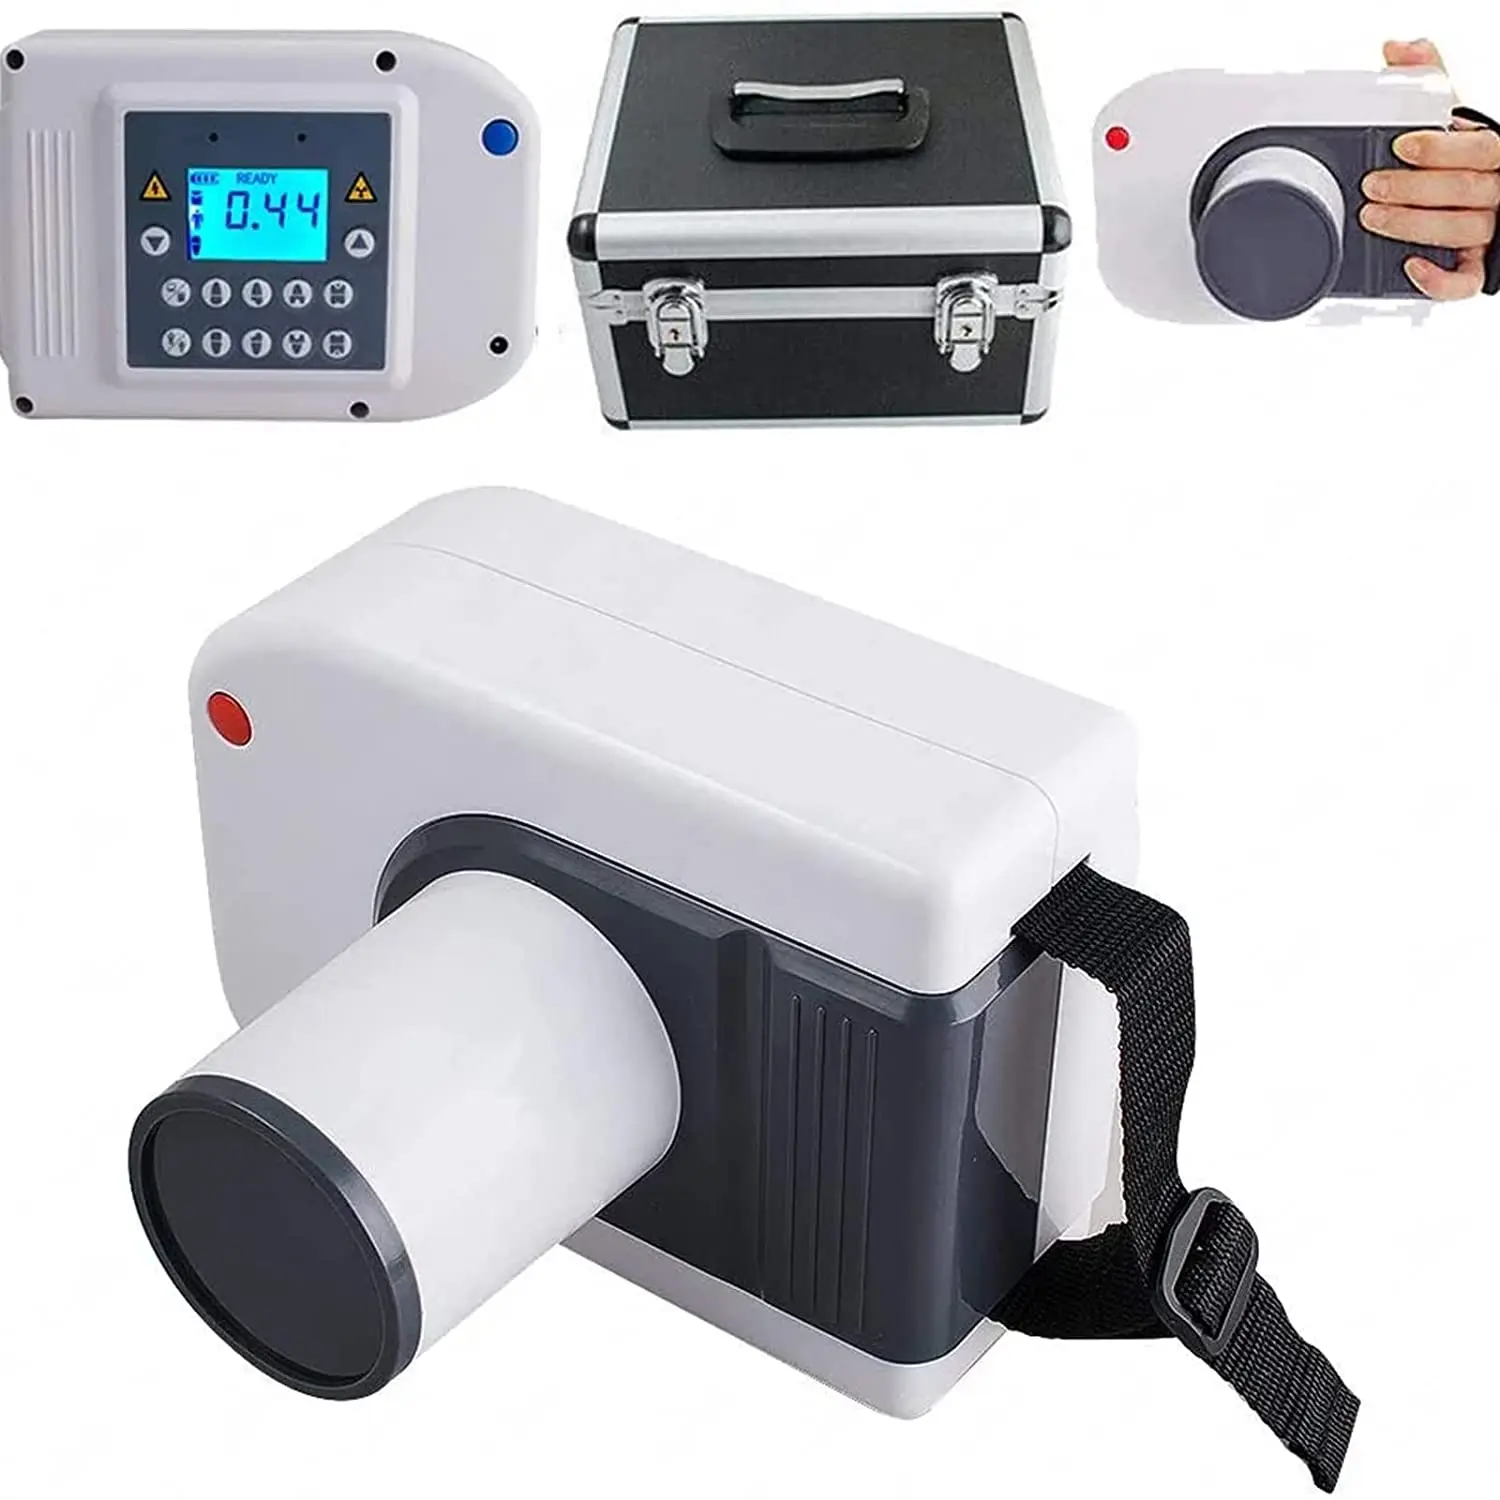 Good Quality portable dental x ray unit With LCD Touch Screen HD Image Camera 60KV X-Ray for Dentist veterinary Use